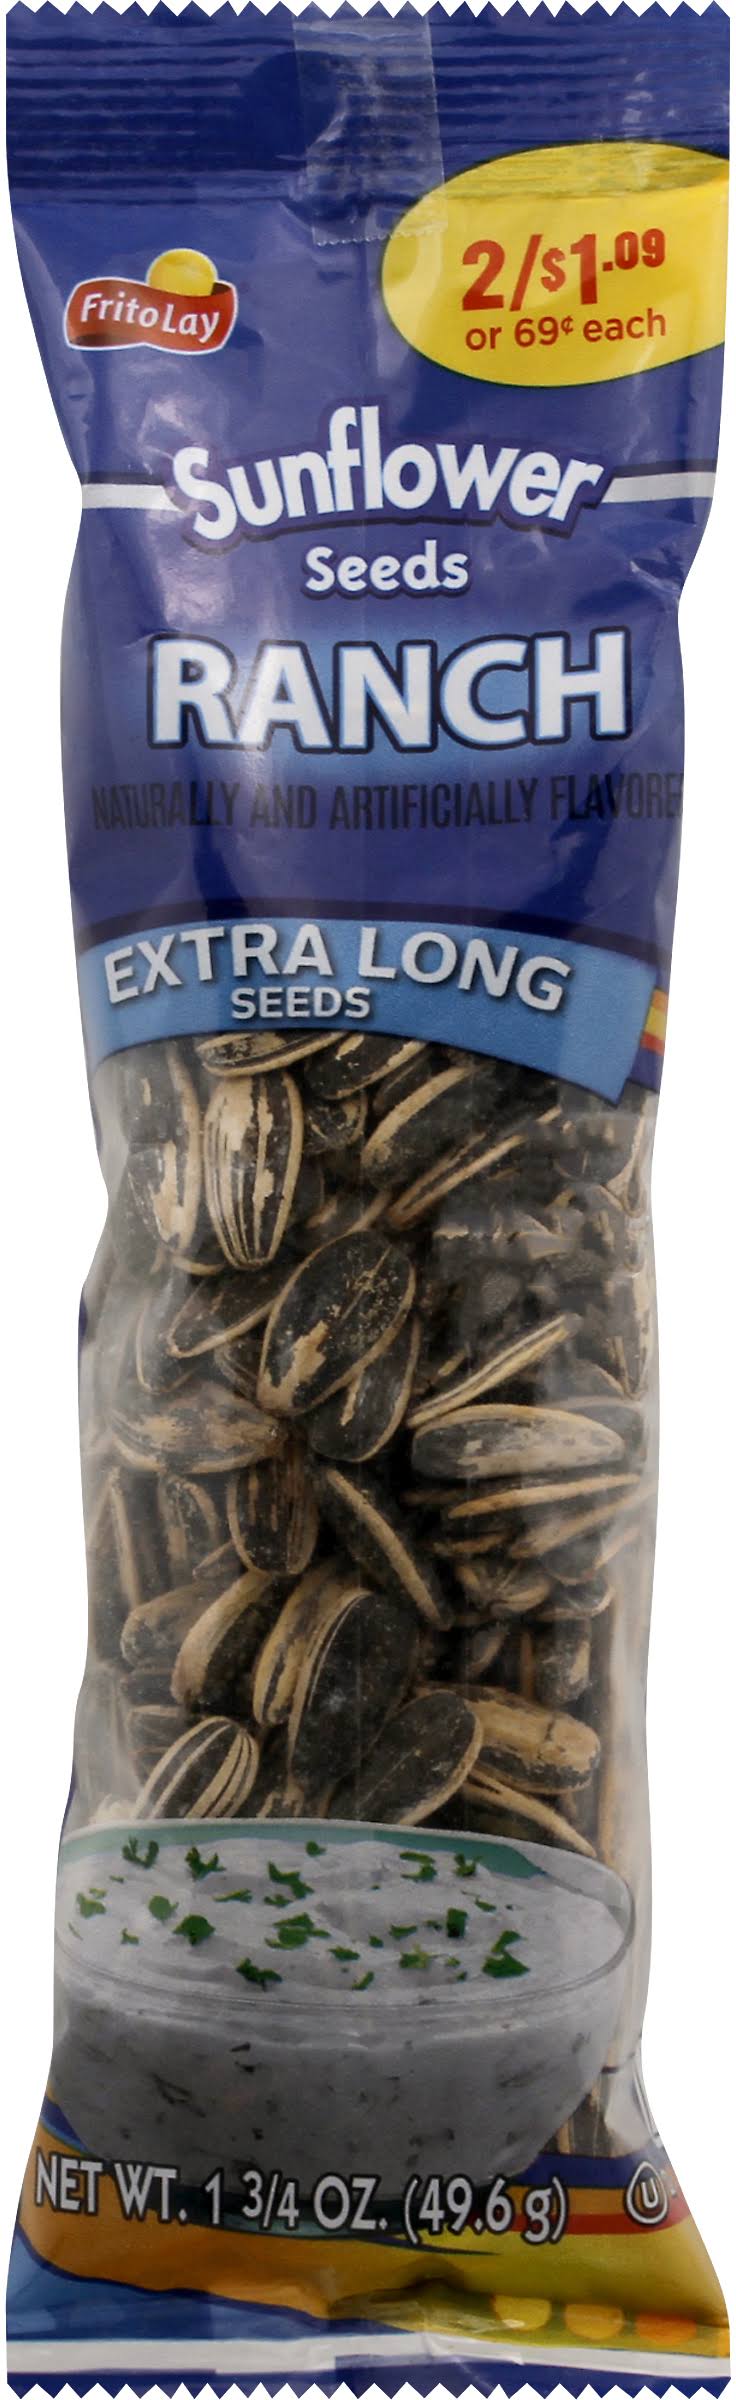 Frito Lay Sunflower Seeds, Ranch, Extra Long - 1-3/4 oz (49.6 g)